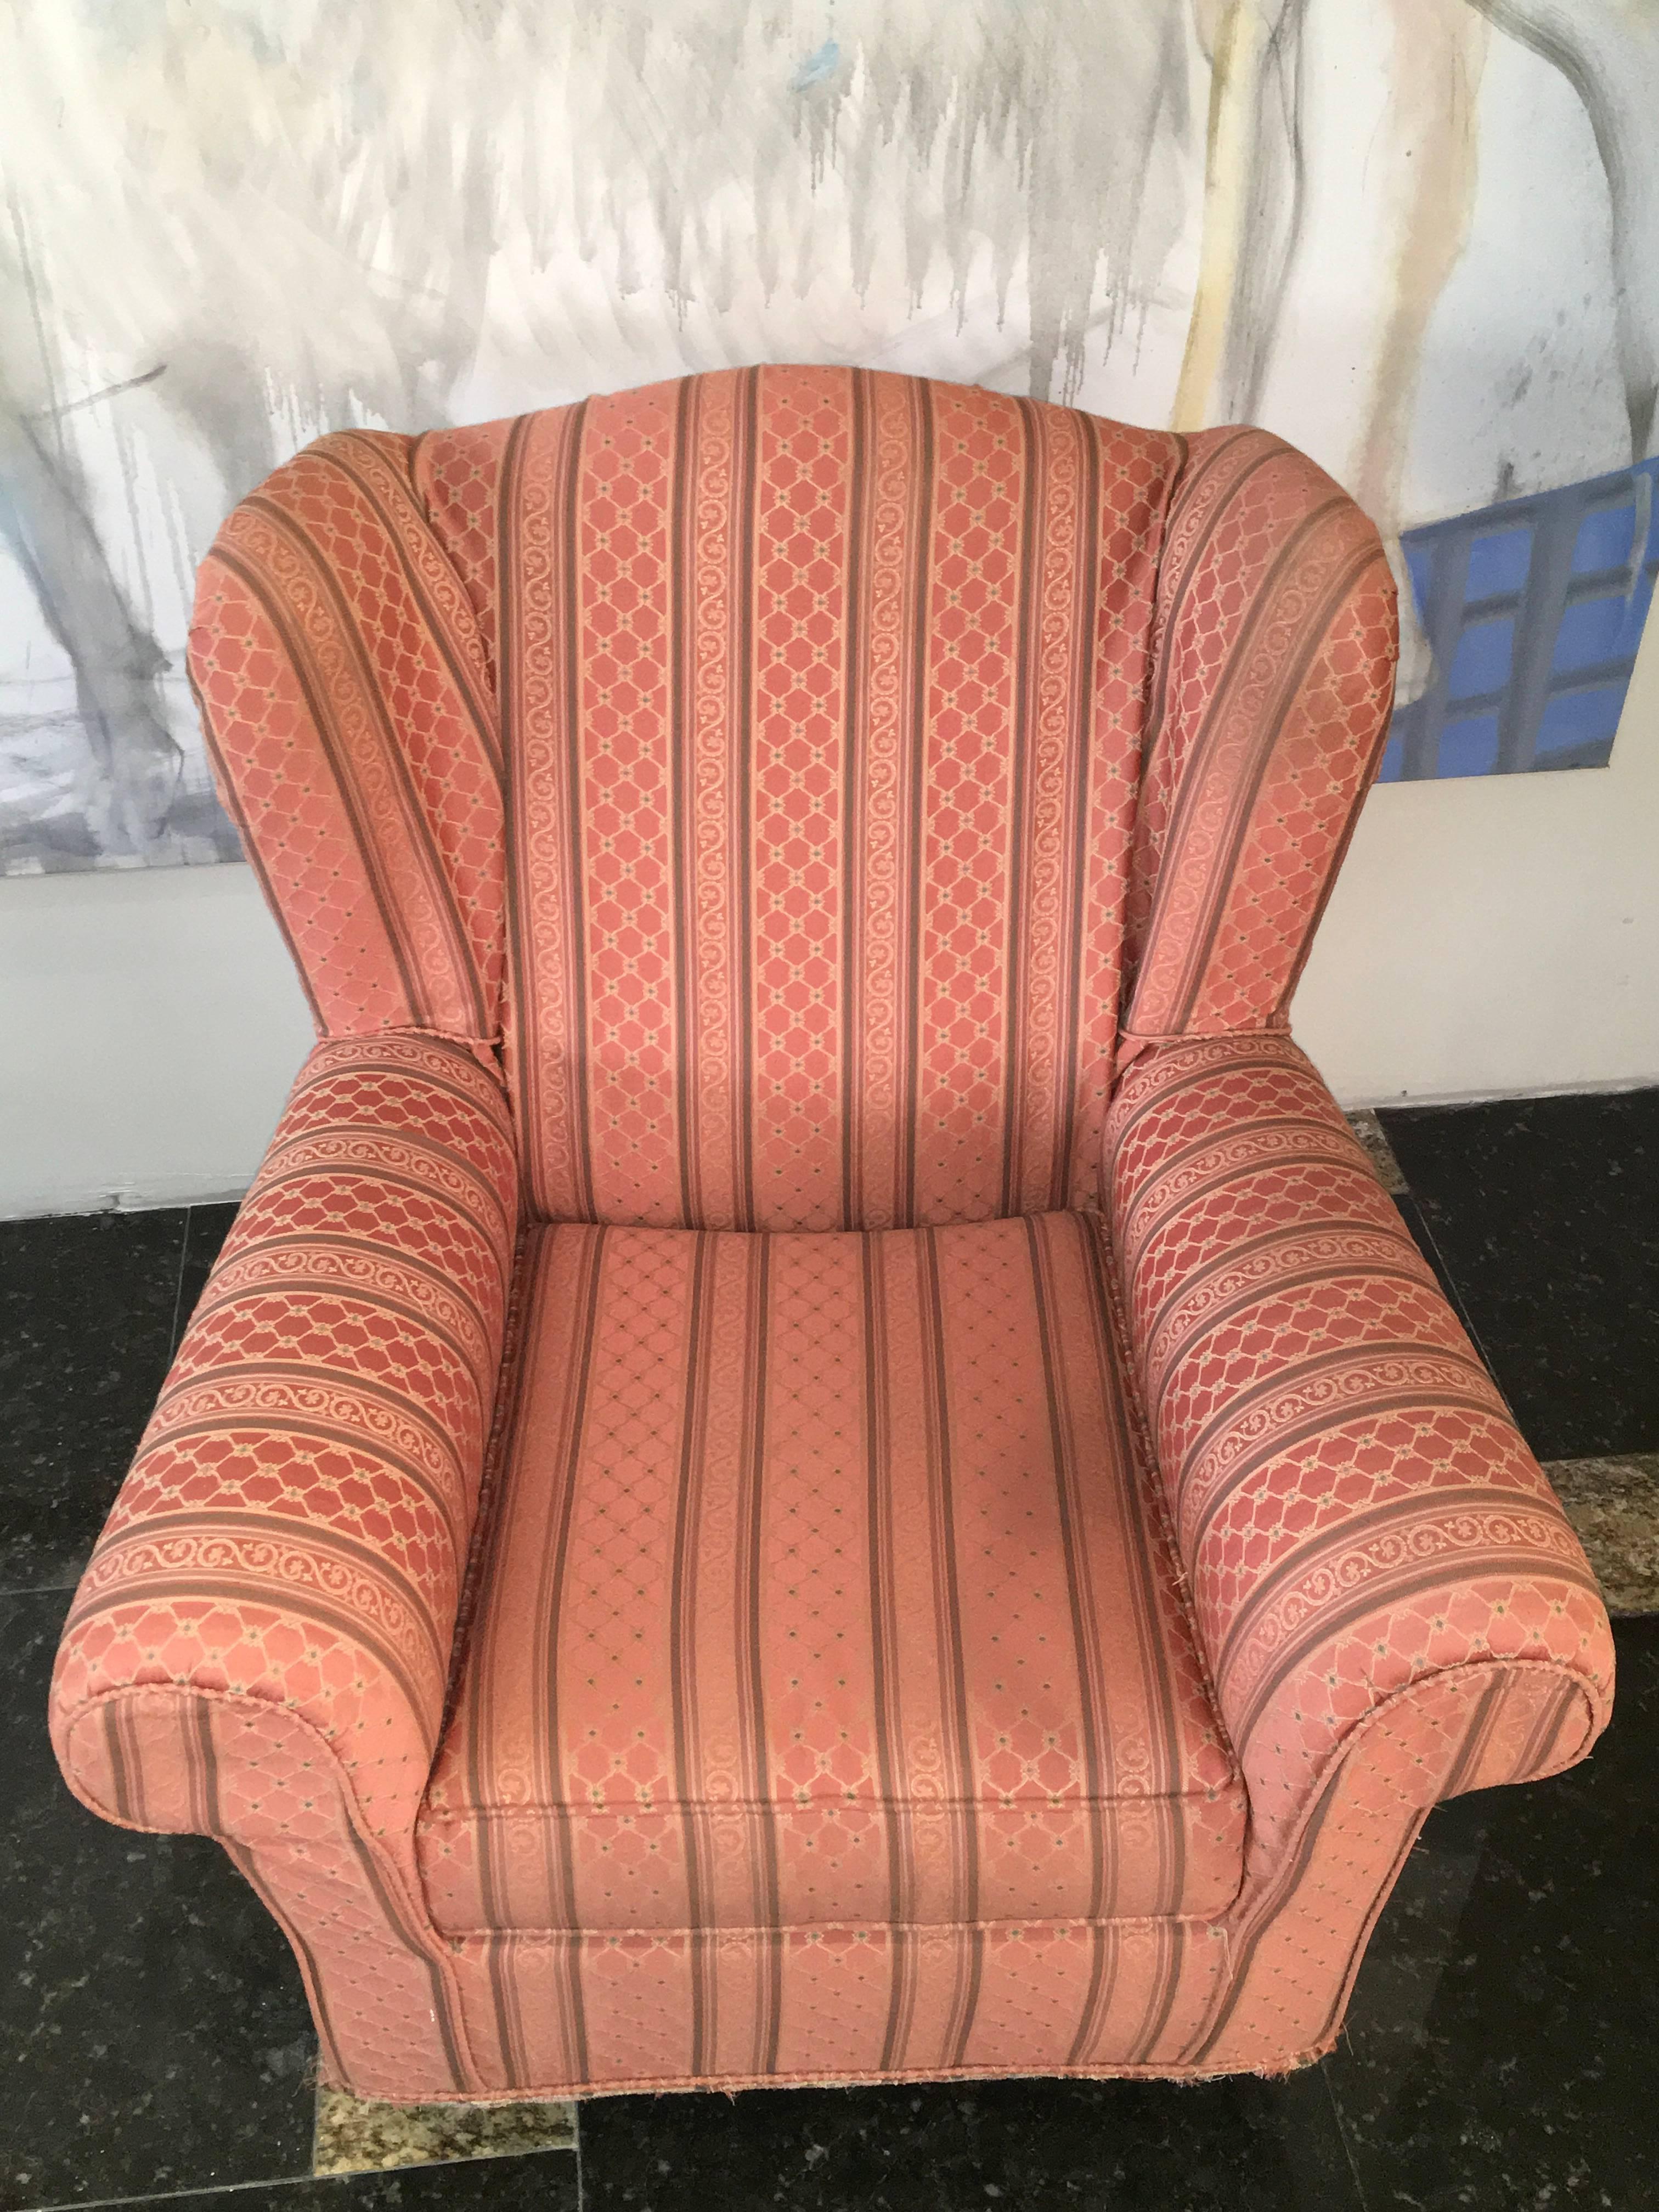 Beautiful Italian textile and silk armchair in excellent condition, soft and comfortable very warm pink detailed color.
